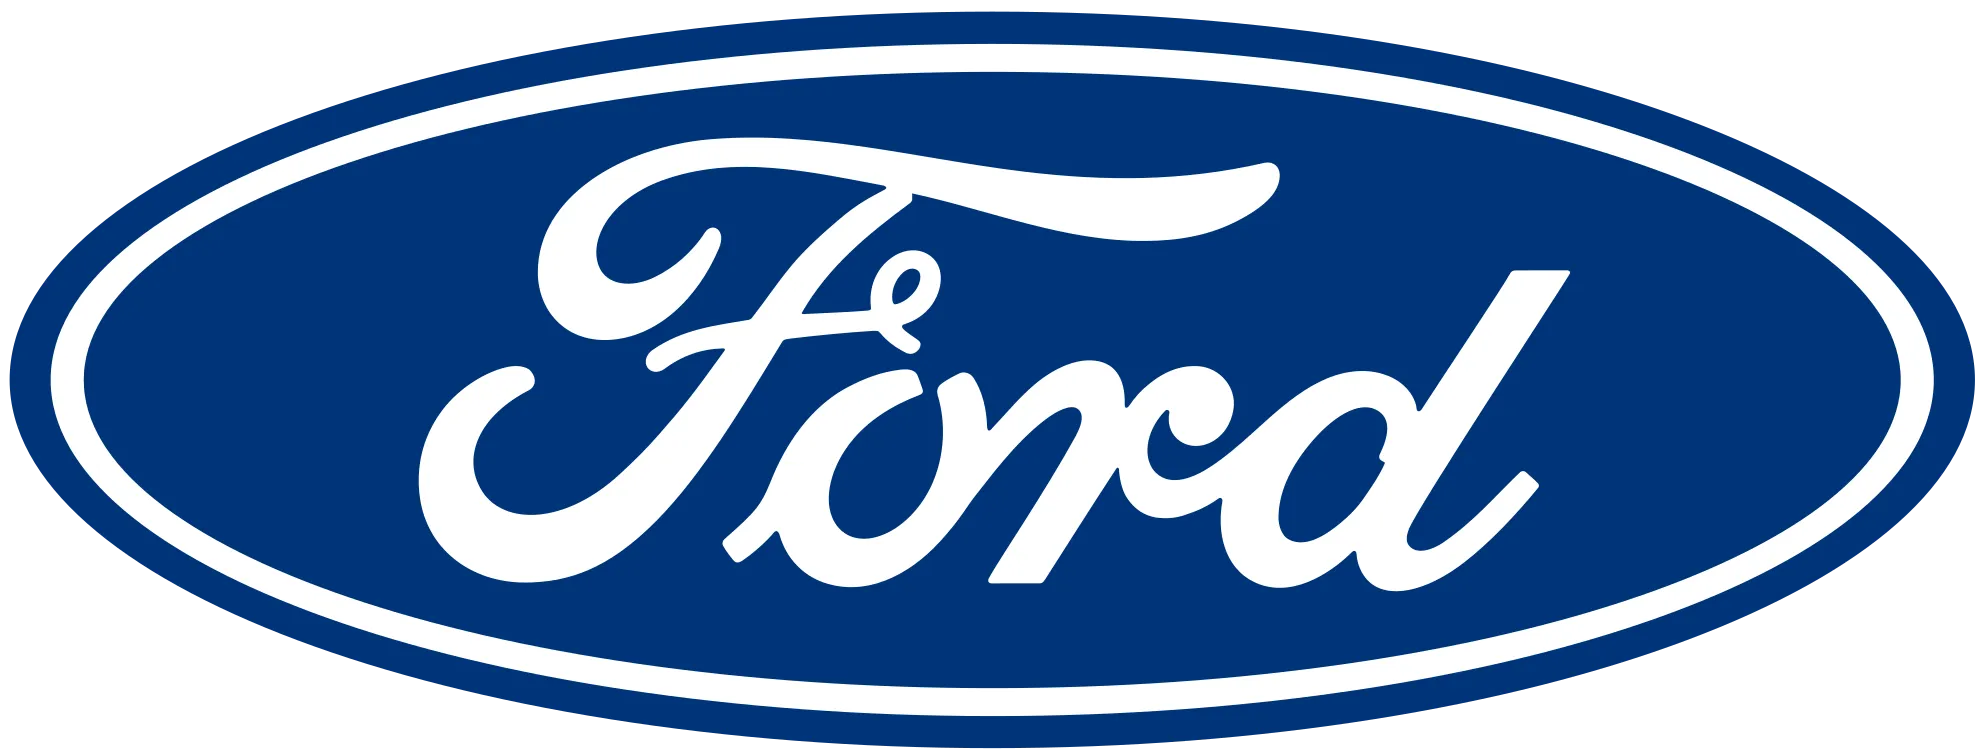 ford פורד